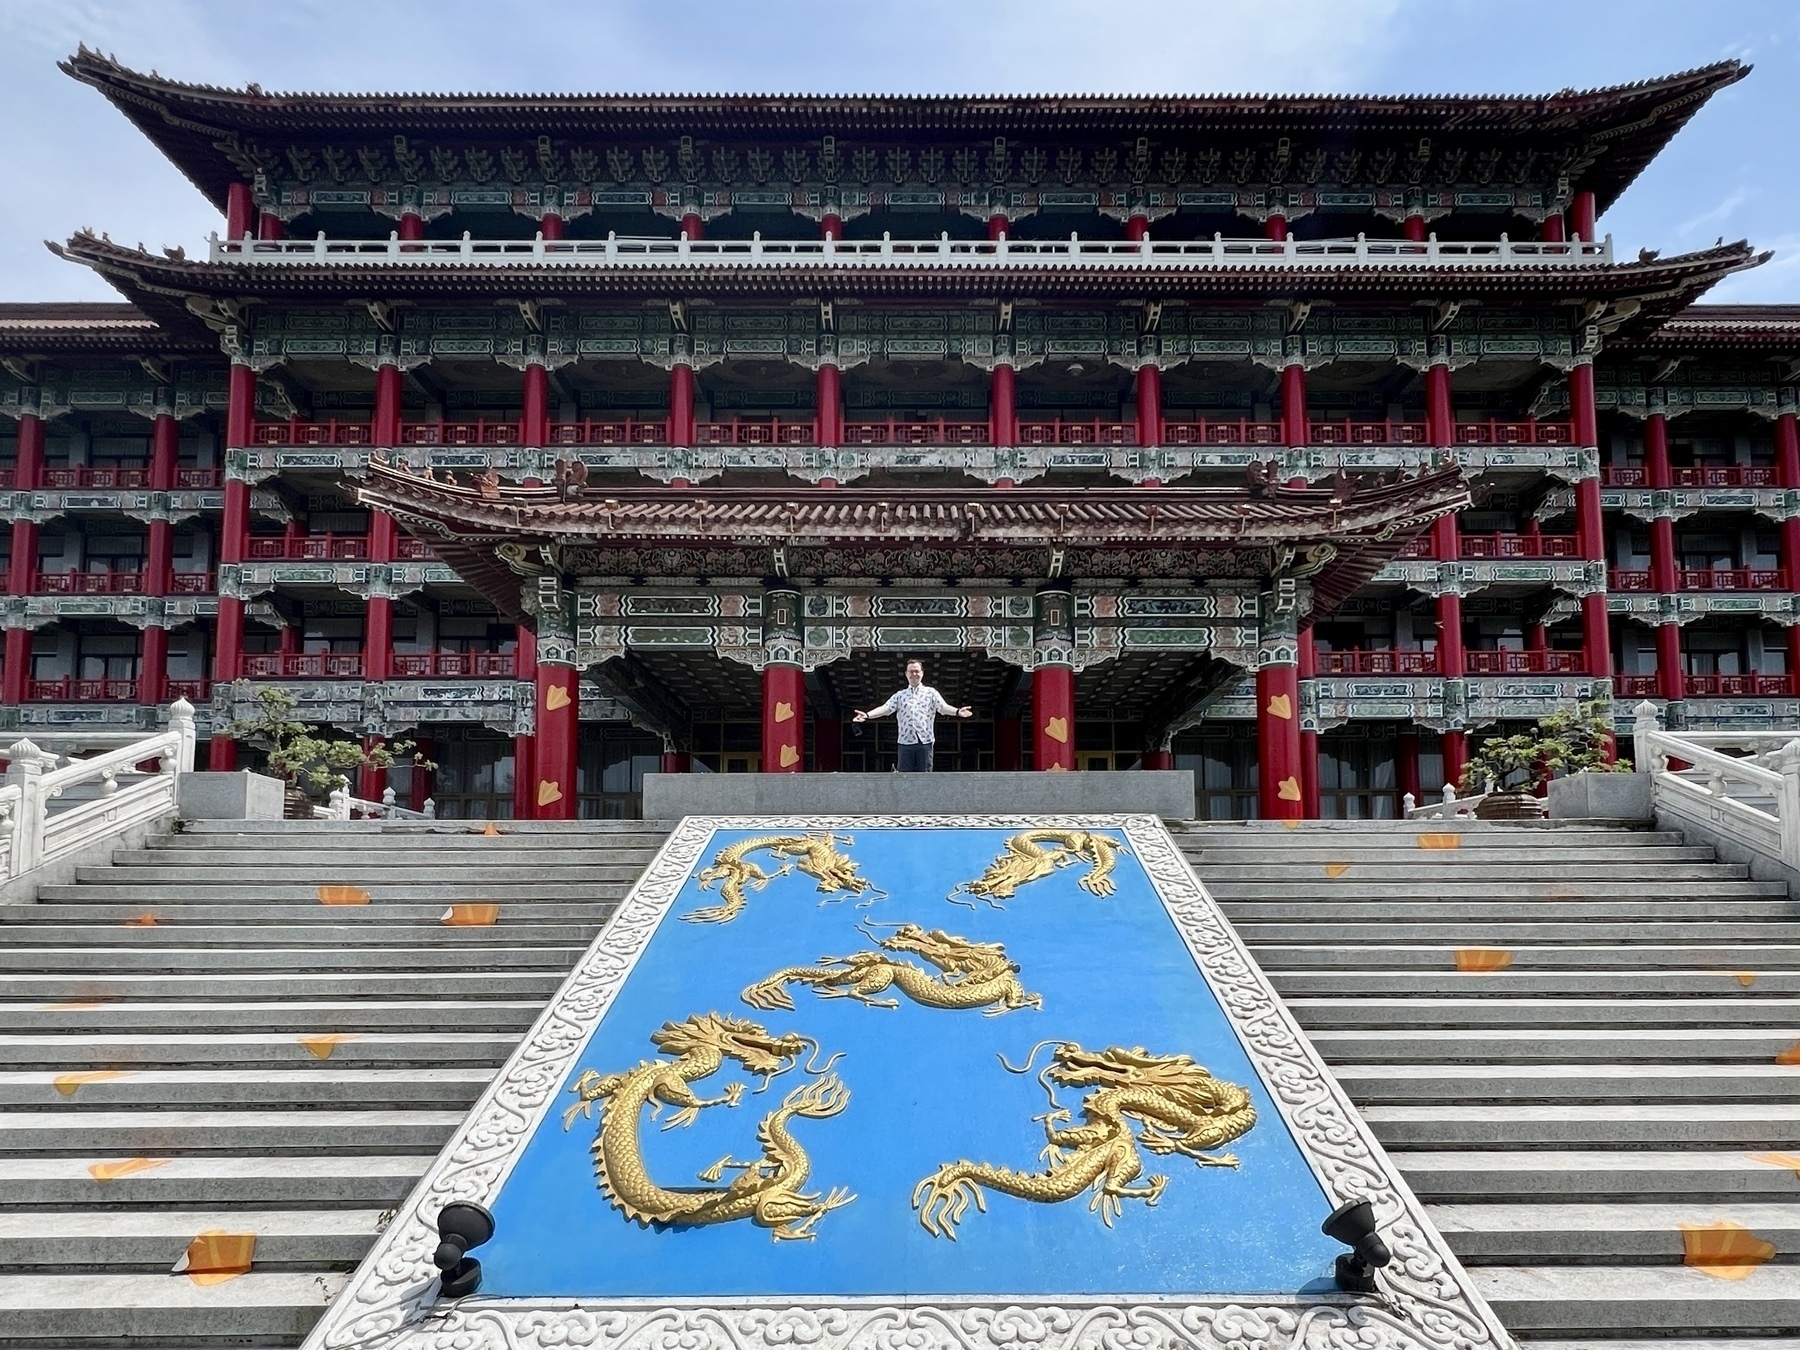 Chad stands at the entrance to the hotel, atop a staircase decorated with golden dragons, arms outstretched in a welcoming motion